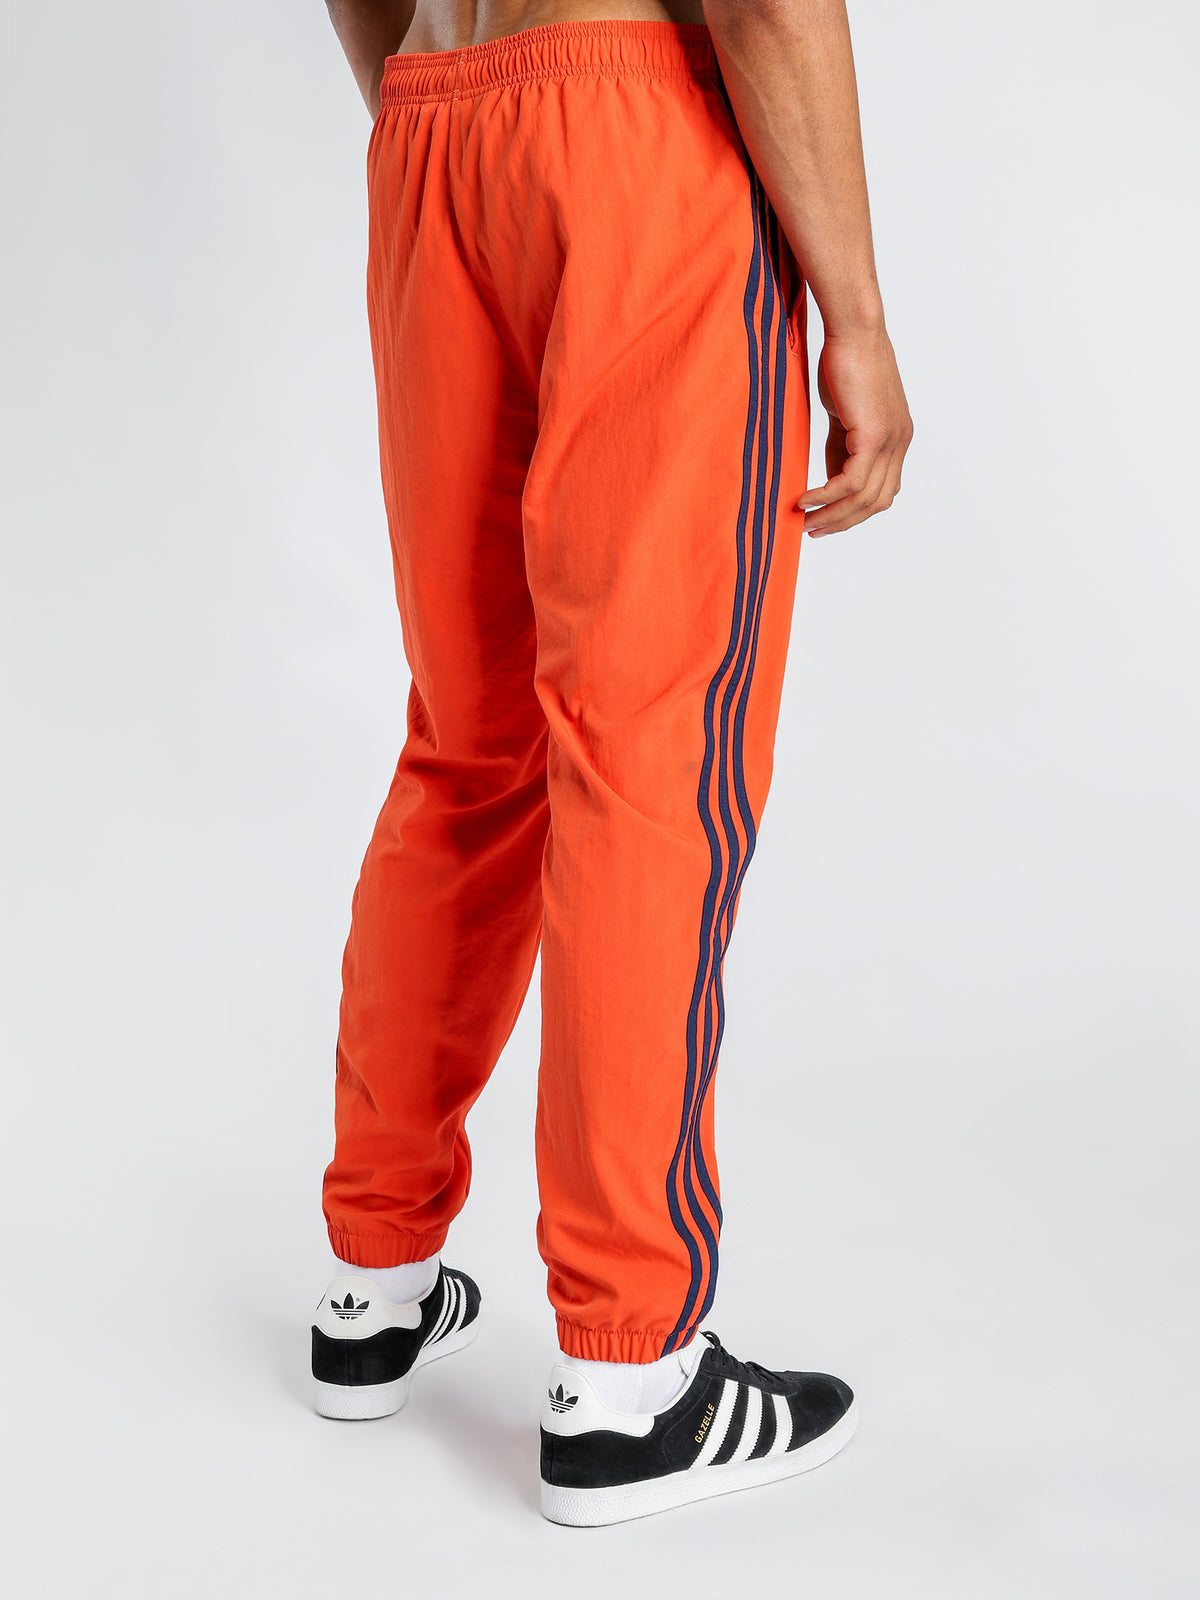 Woven 3 Stripe Tourney Warm Up Pants in Raw Amber